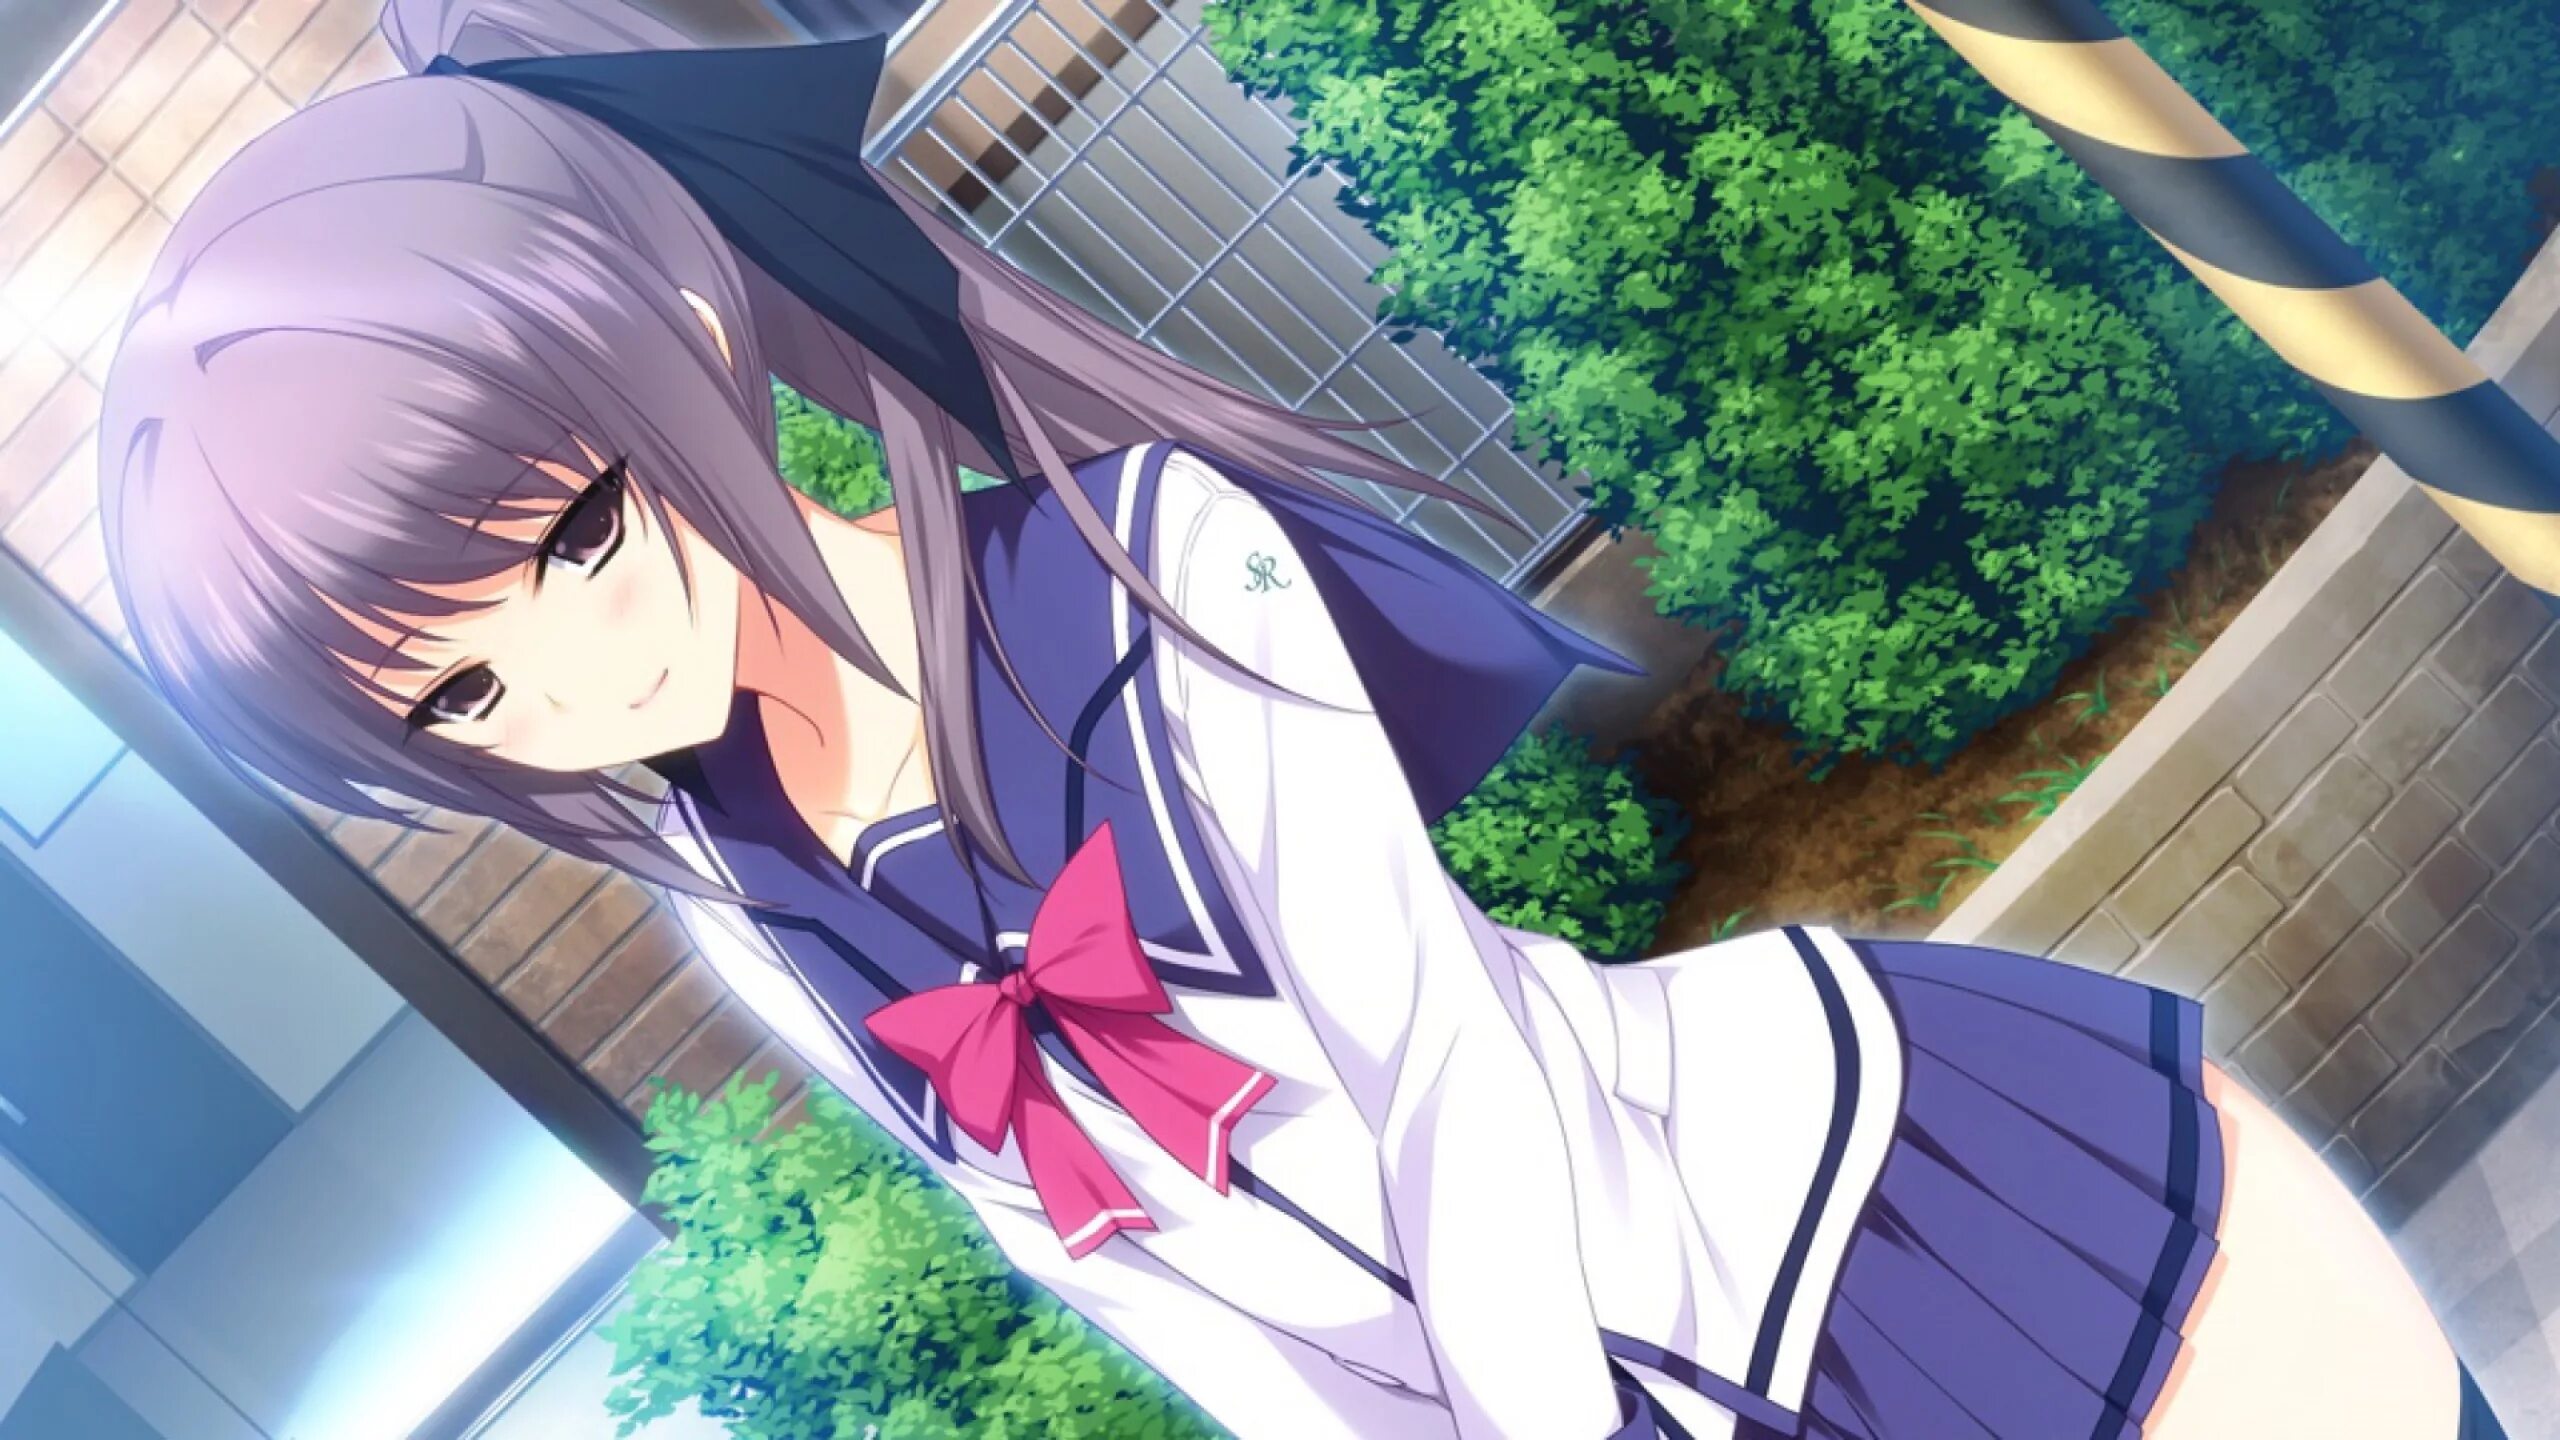 Lovely x cation CG. Lovely x cation the animation. Eroge in real life